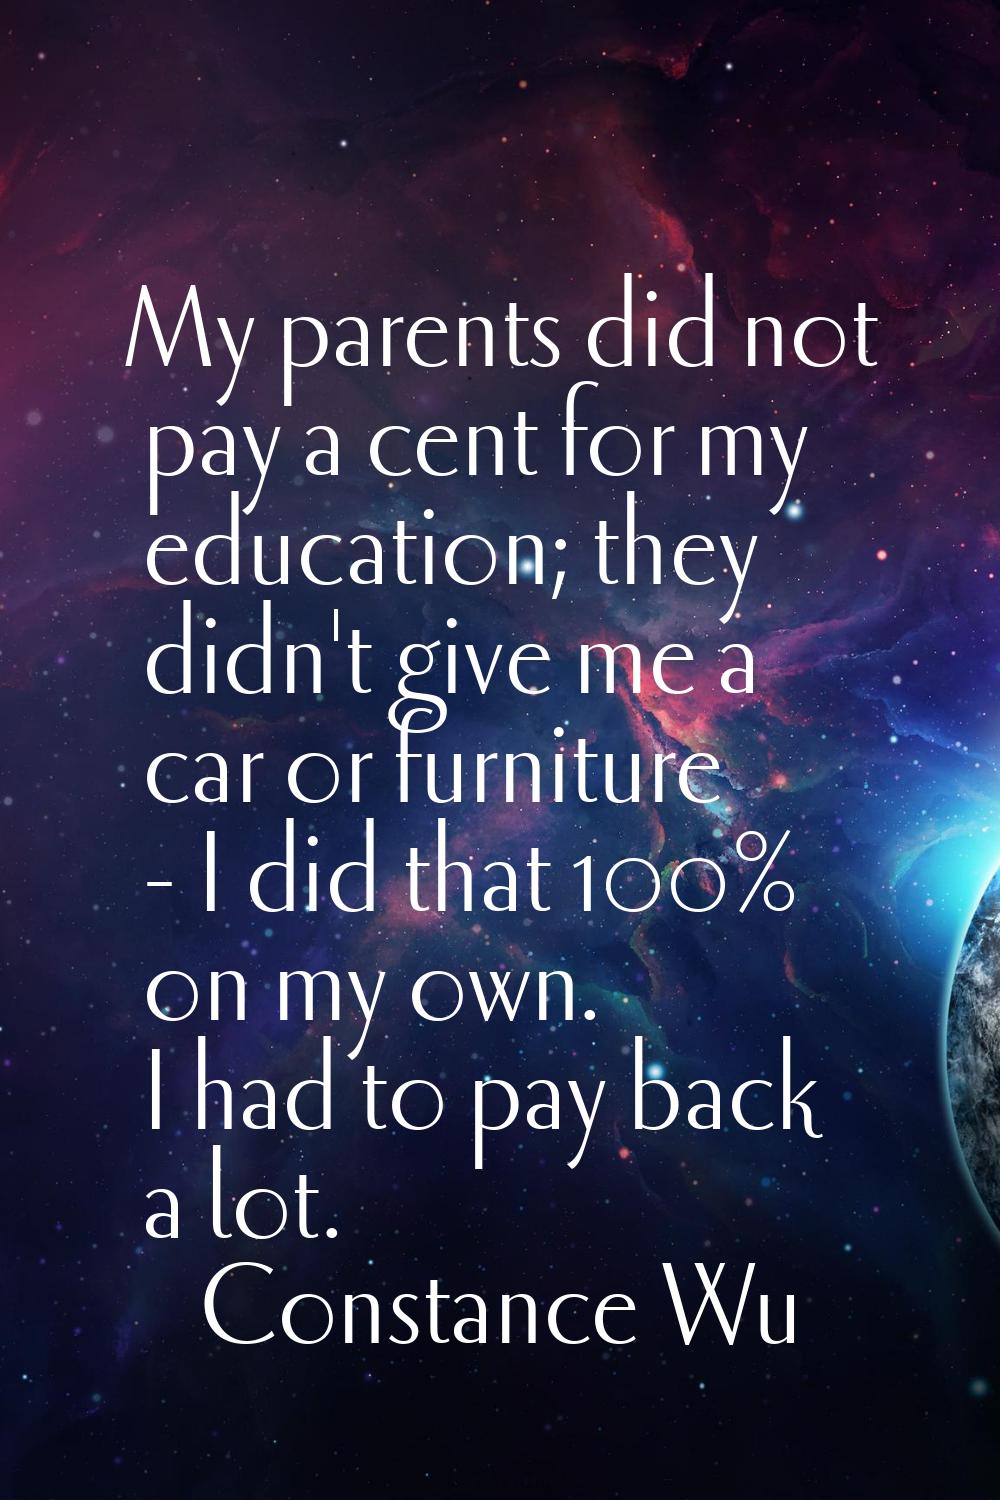 My parents did not pay a cent for my education; they didn't give me a car or furniture - I did that